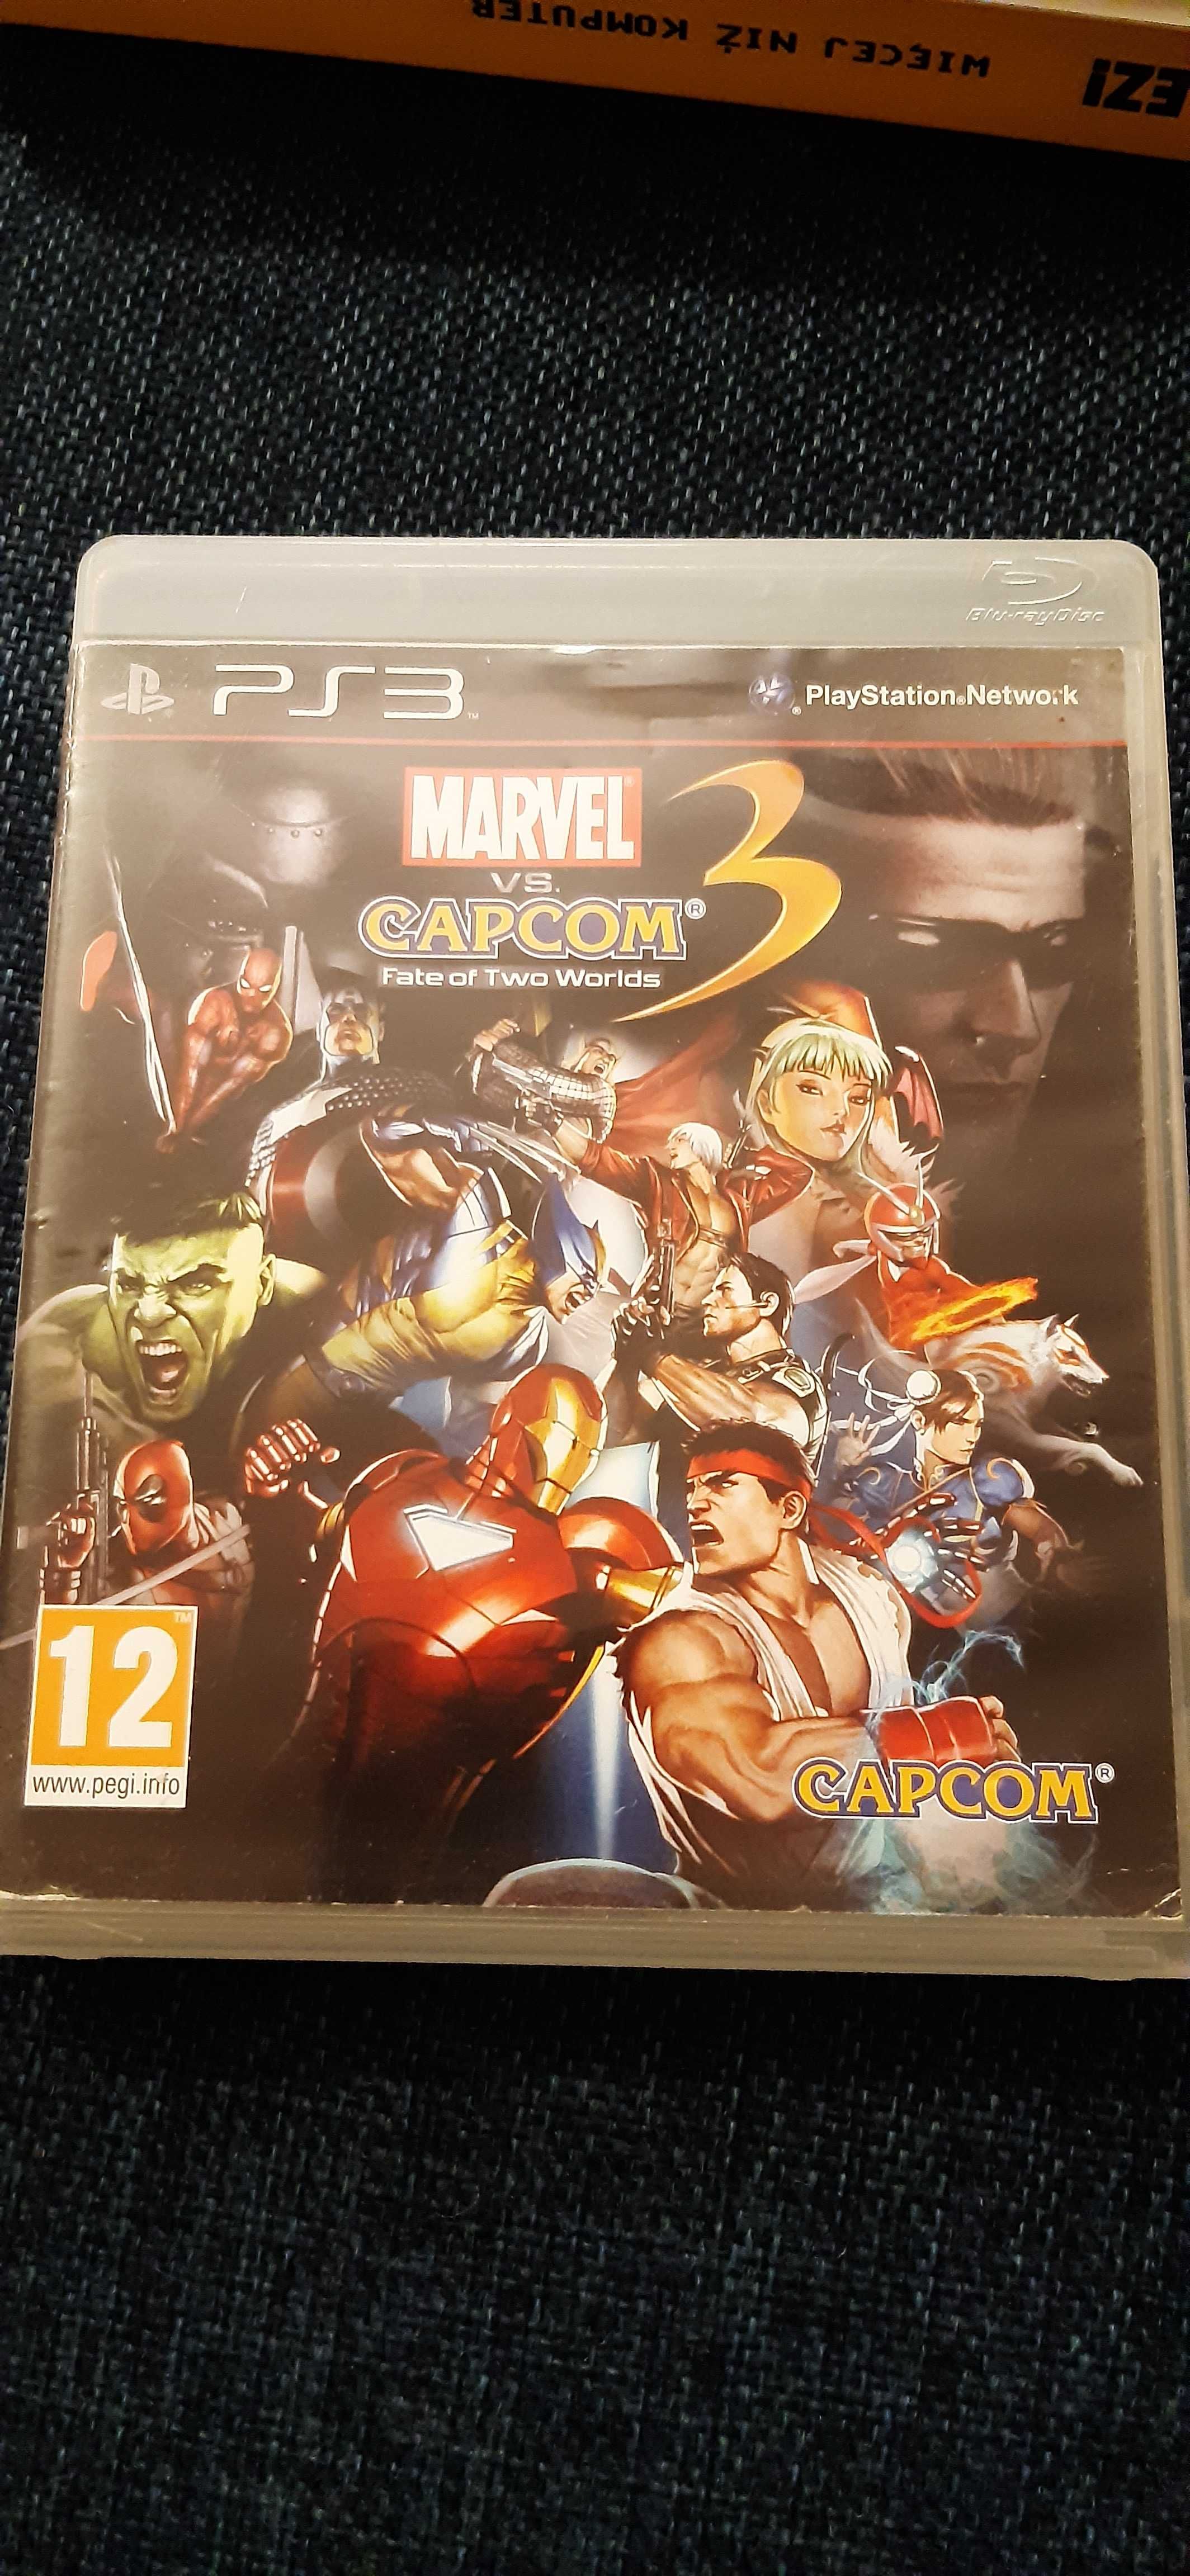 Marvel vs Capcom 3 Fale of Two Worlds ps 3